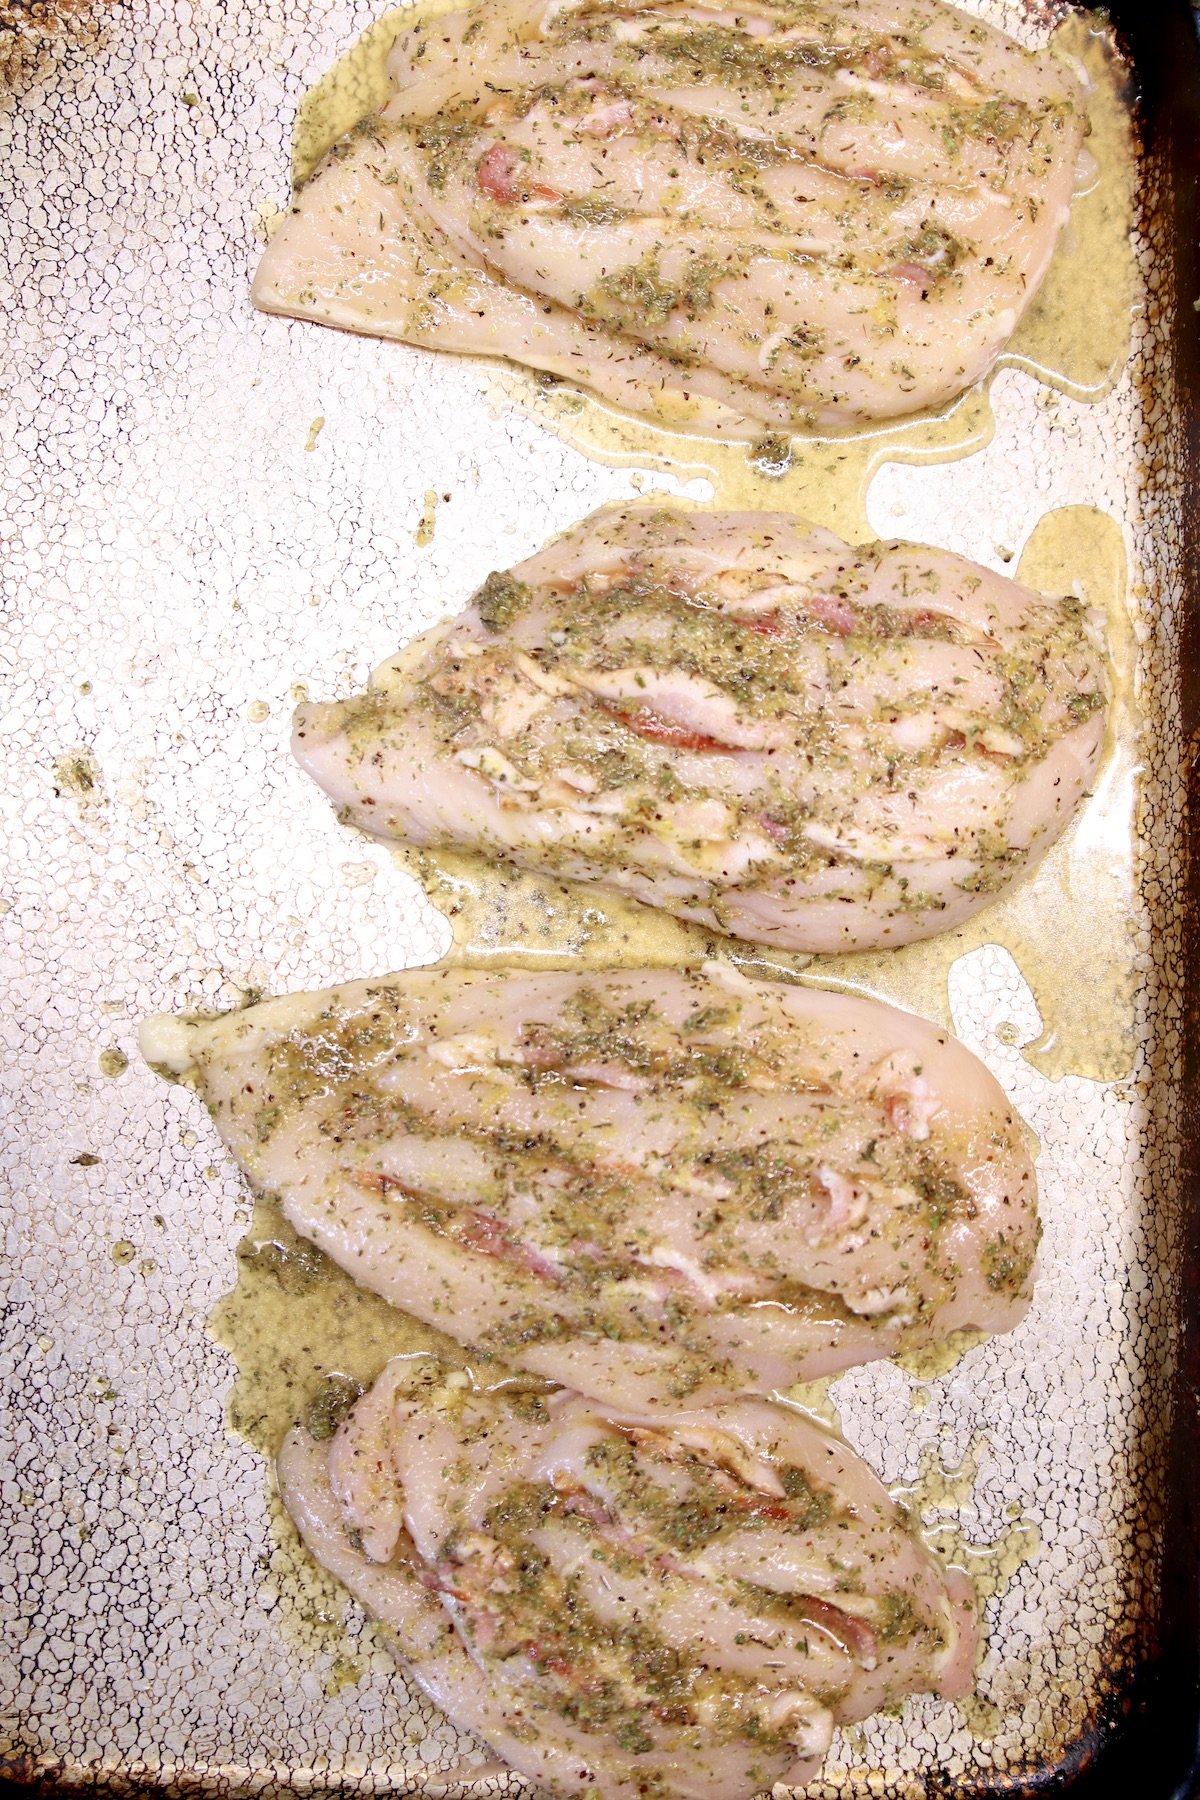 sheet pan with 4 chicken breasts, stuffed with bacon and topped with marinade